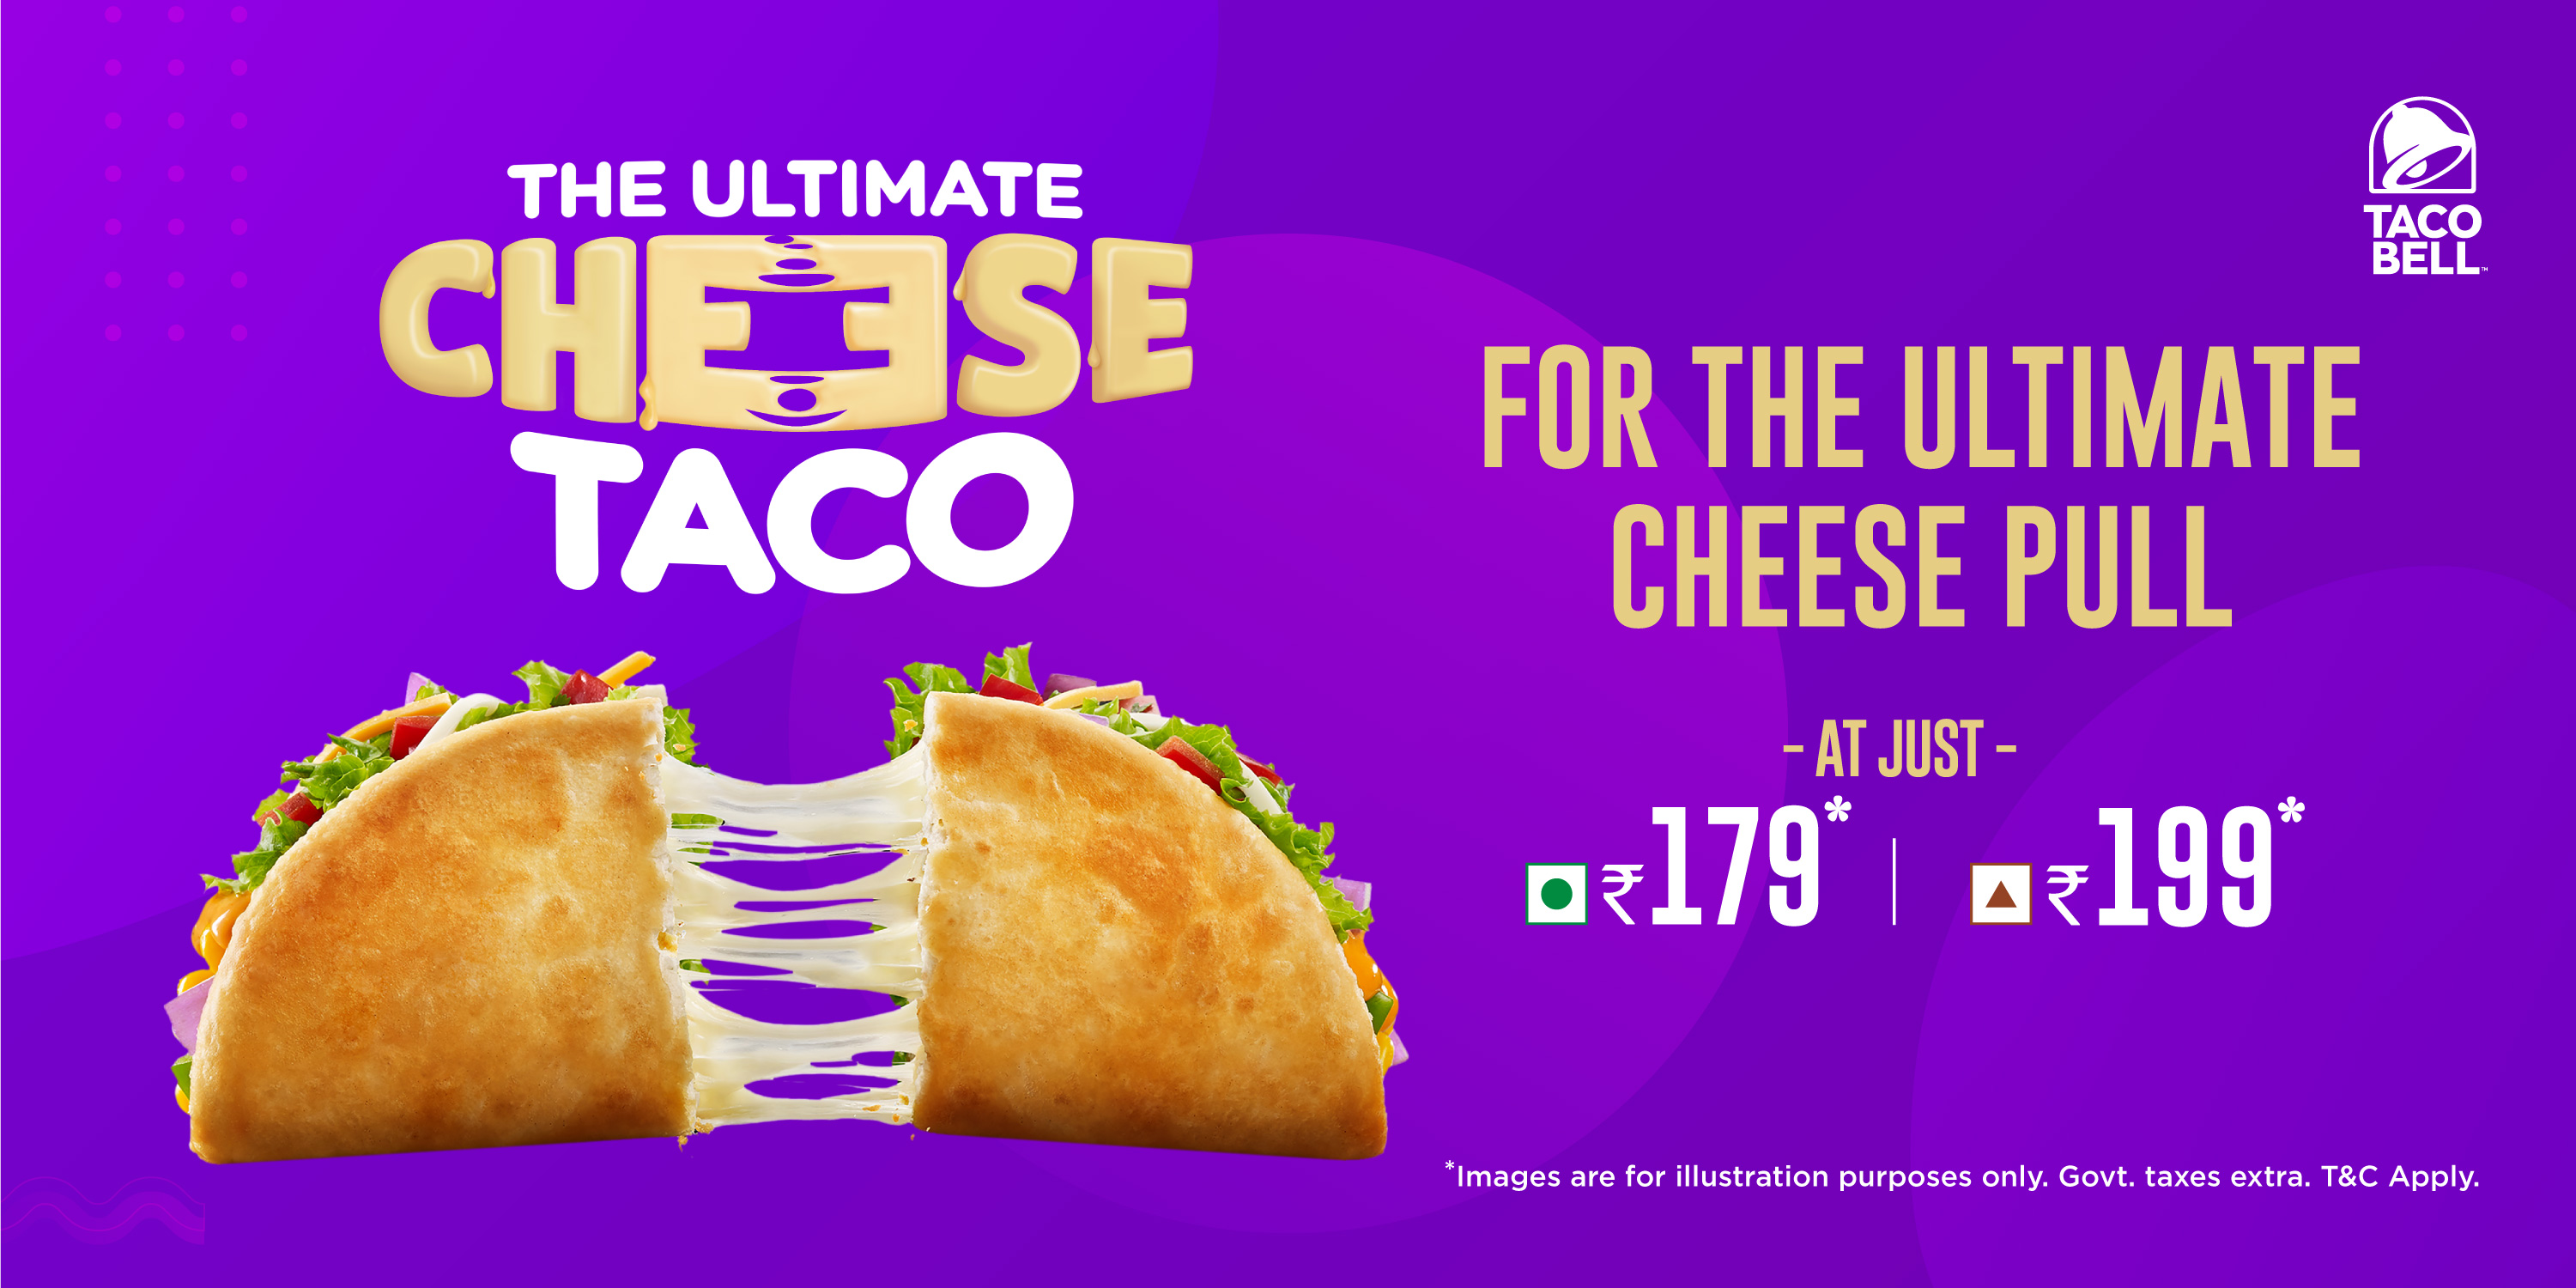 TACO BELL OFFERS A CHEESY SURPRISE FOR ITS CONSUMERS WITH THE LAUNCH OF THE ULTIMATE CHEESE TACO